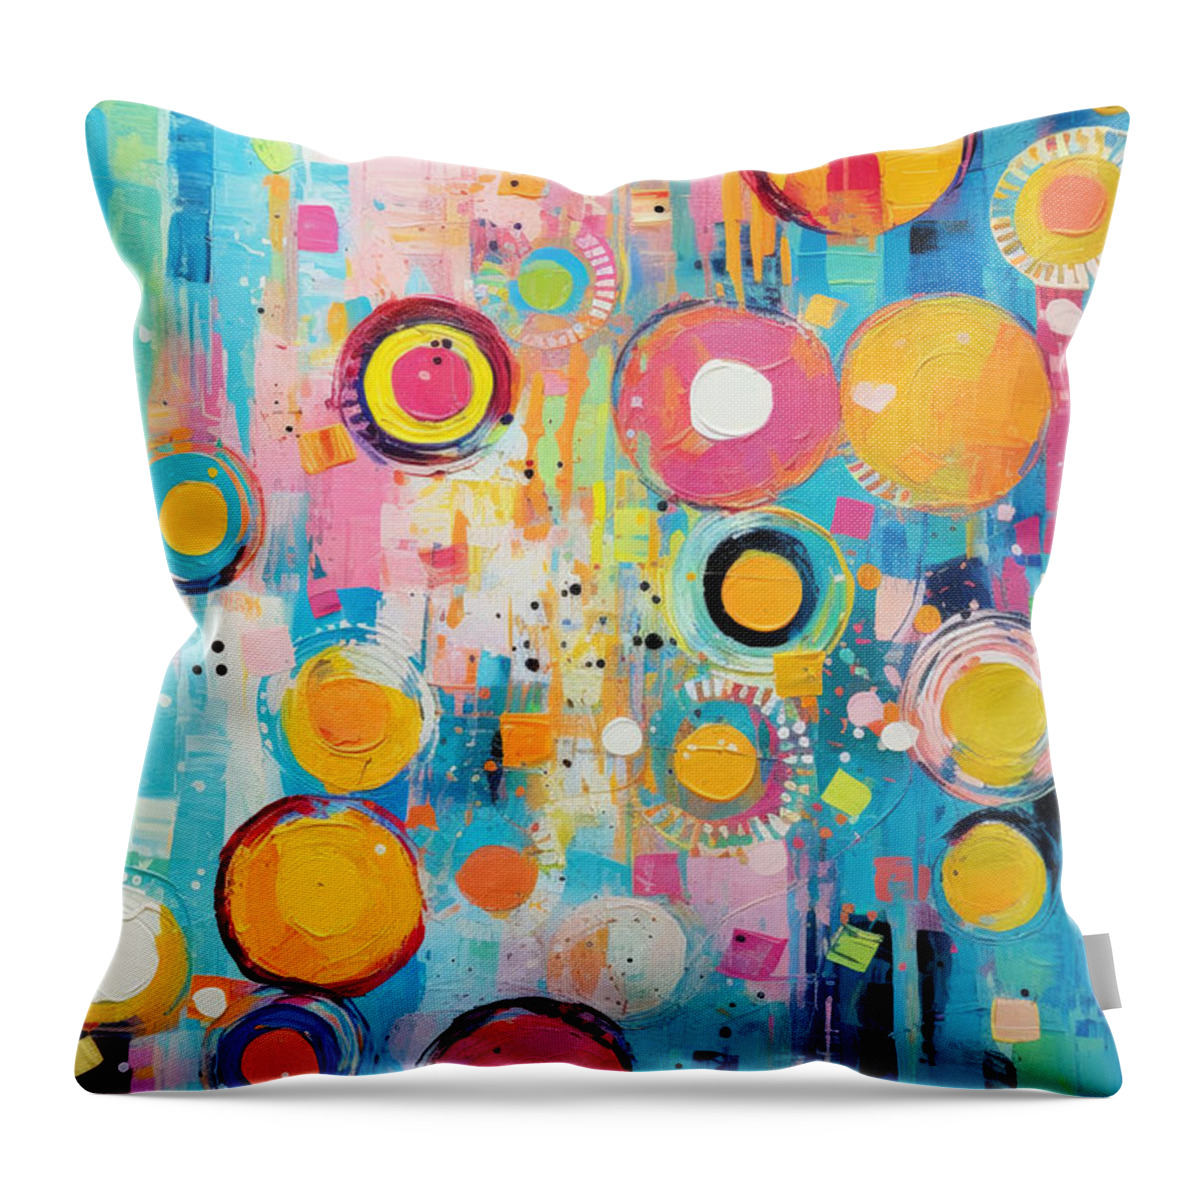 Dott Throw Pillow featuring the painting Colorful Dotts by My Head Cinema